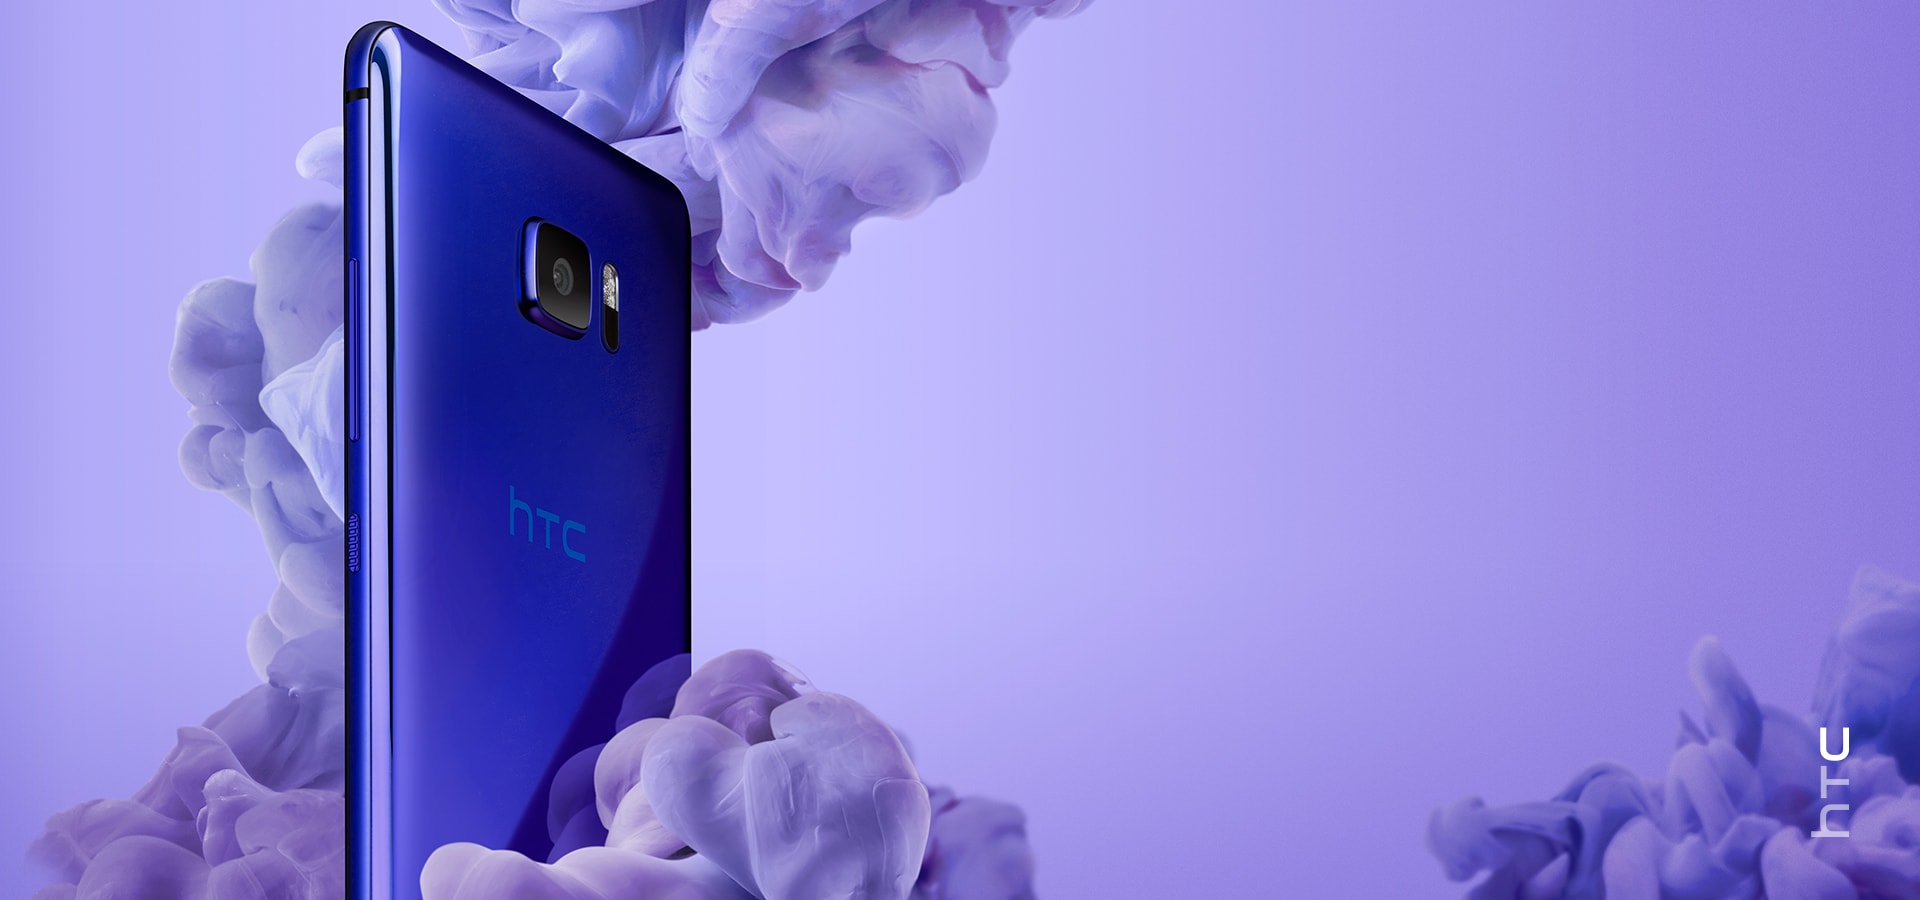 HTC U Ultra officially released